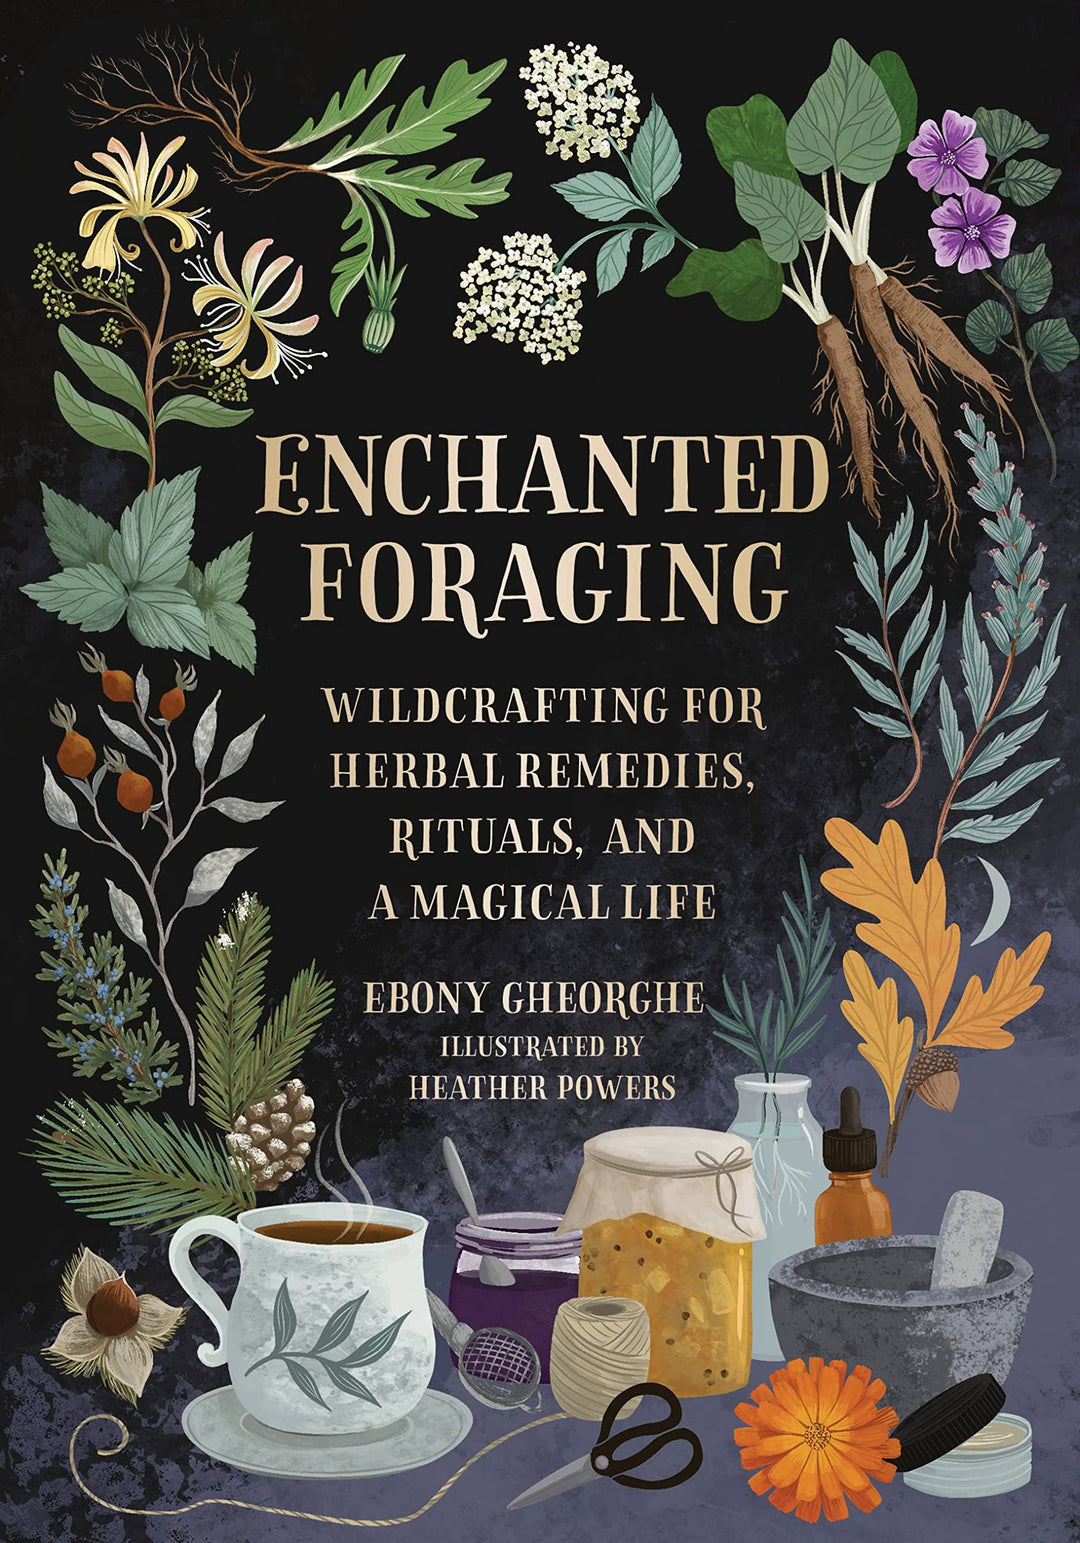 Enchanted Foraging by Ebony Gheorghe